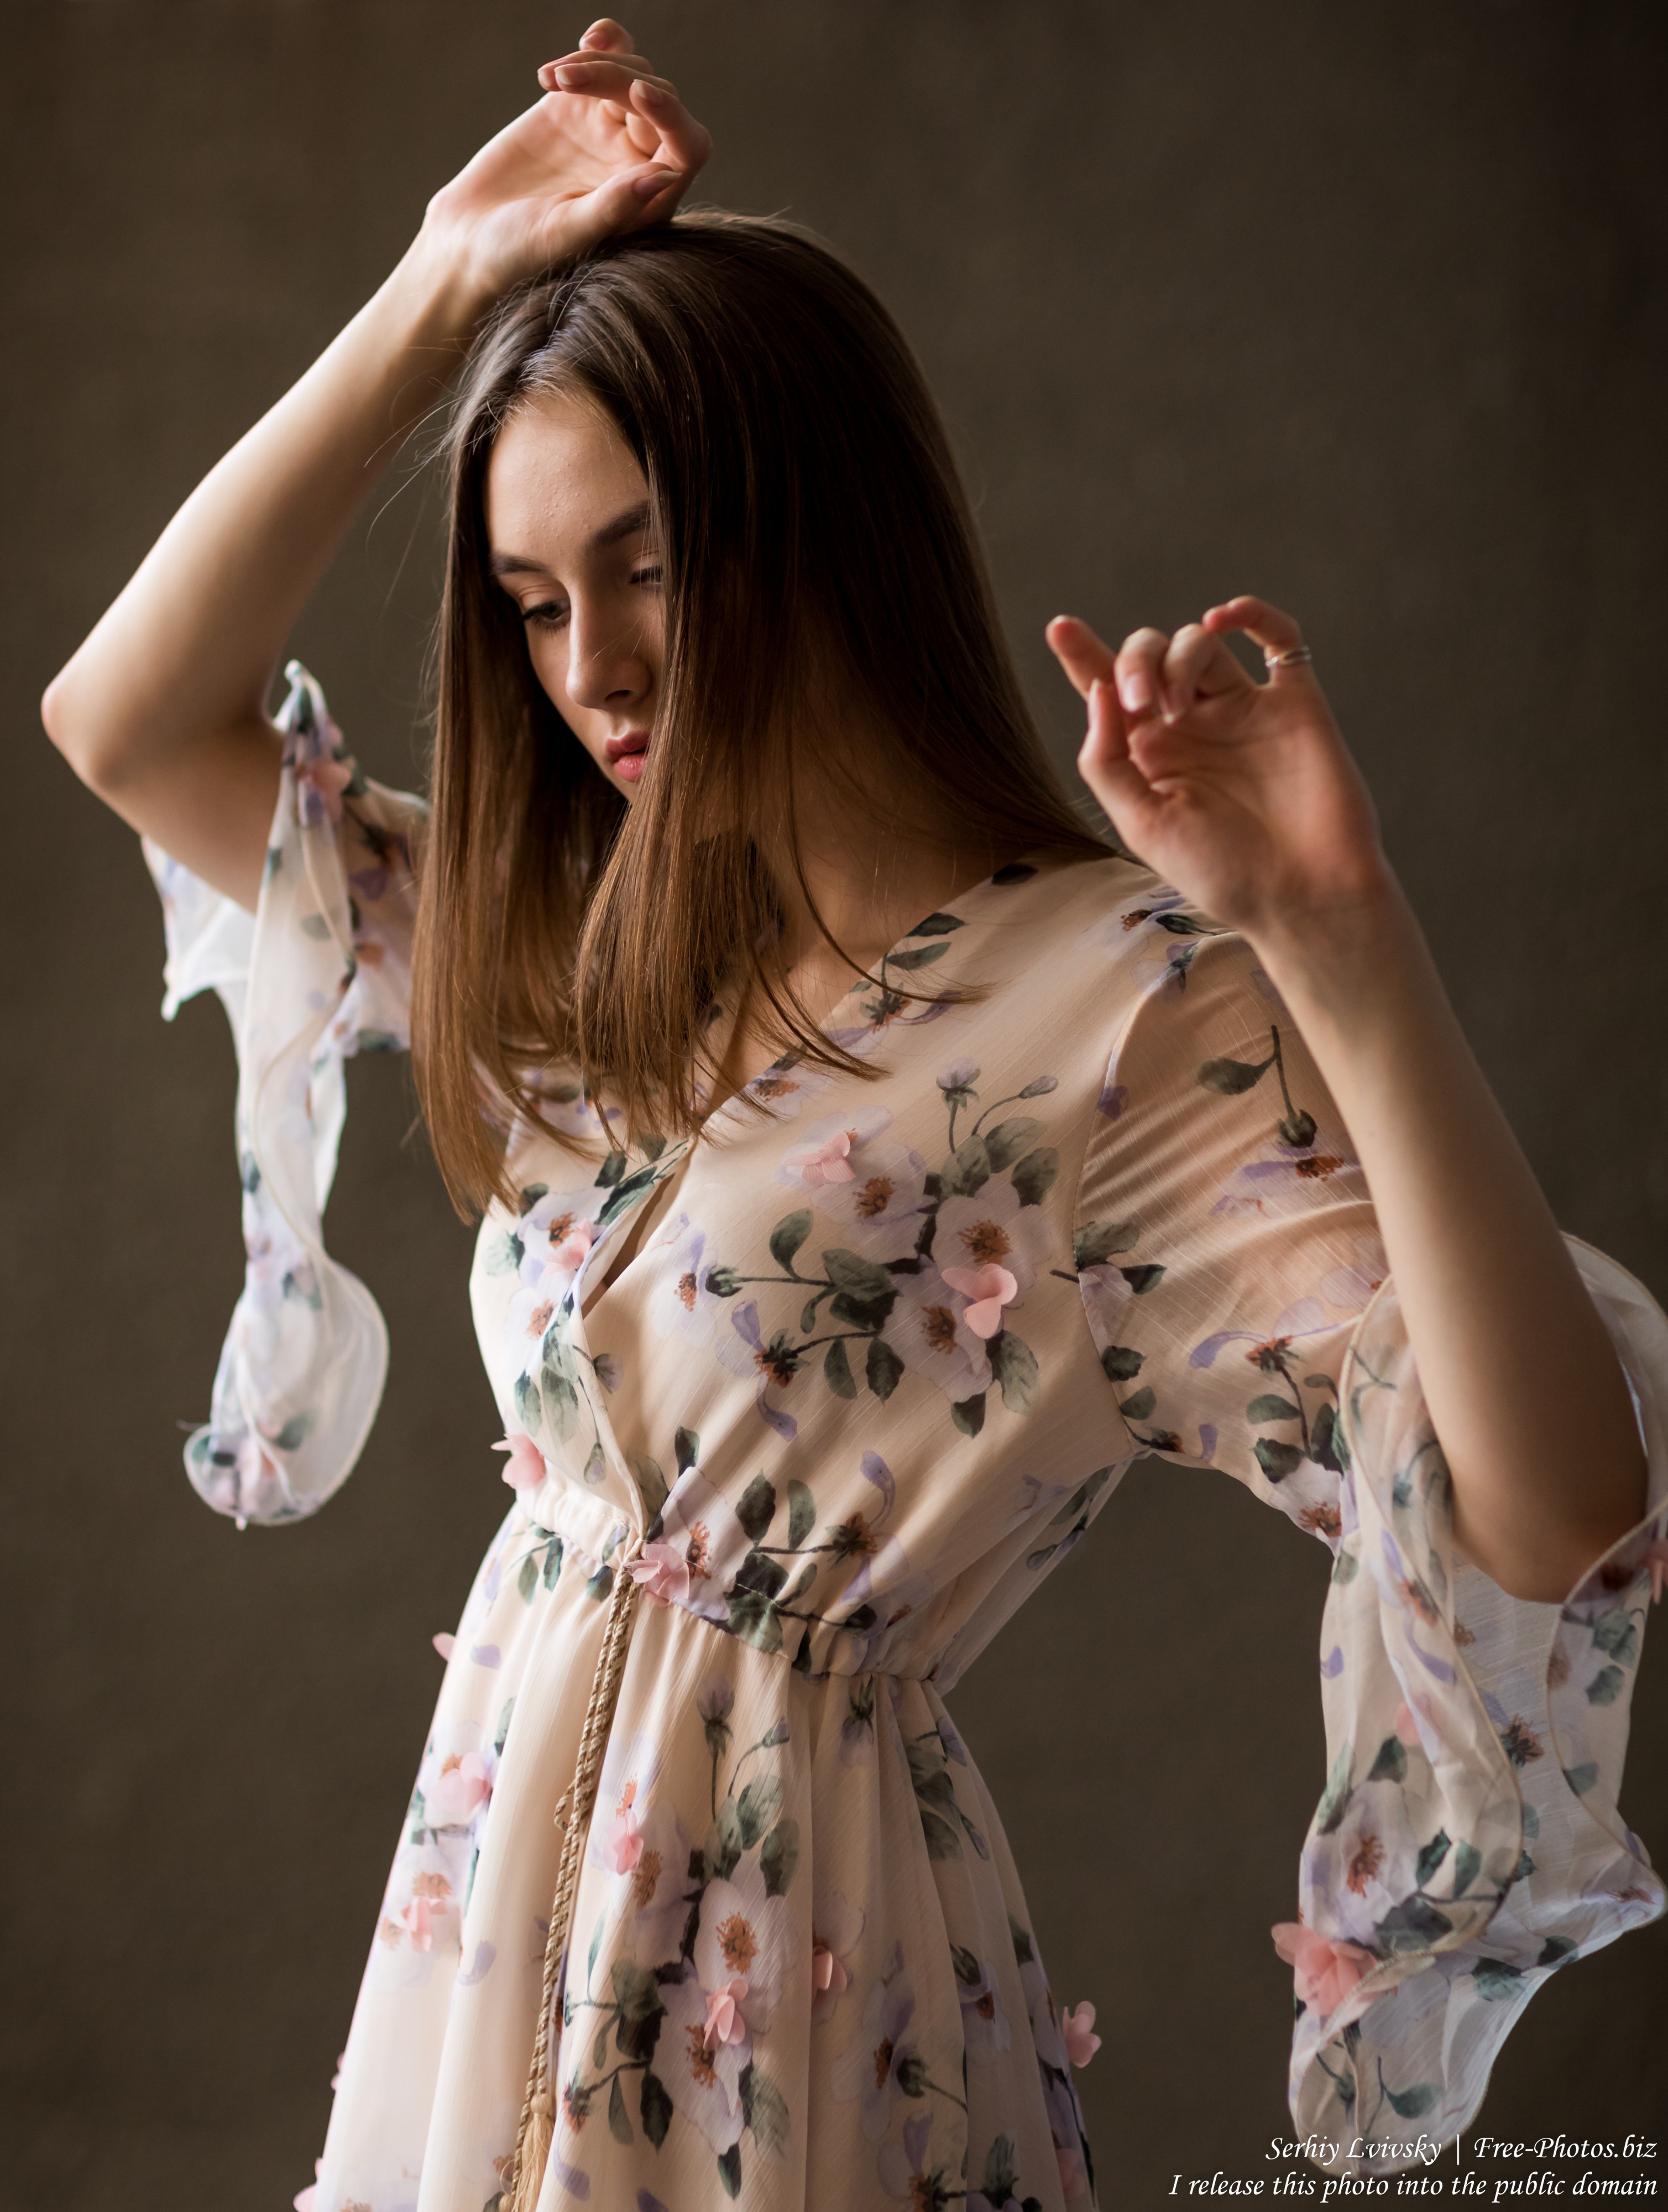 Julia - a 15-year-old girl photographed in July 2019 by Serhiy Lvivsky, picture 13